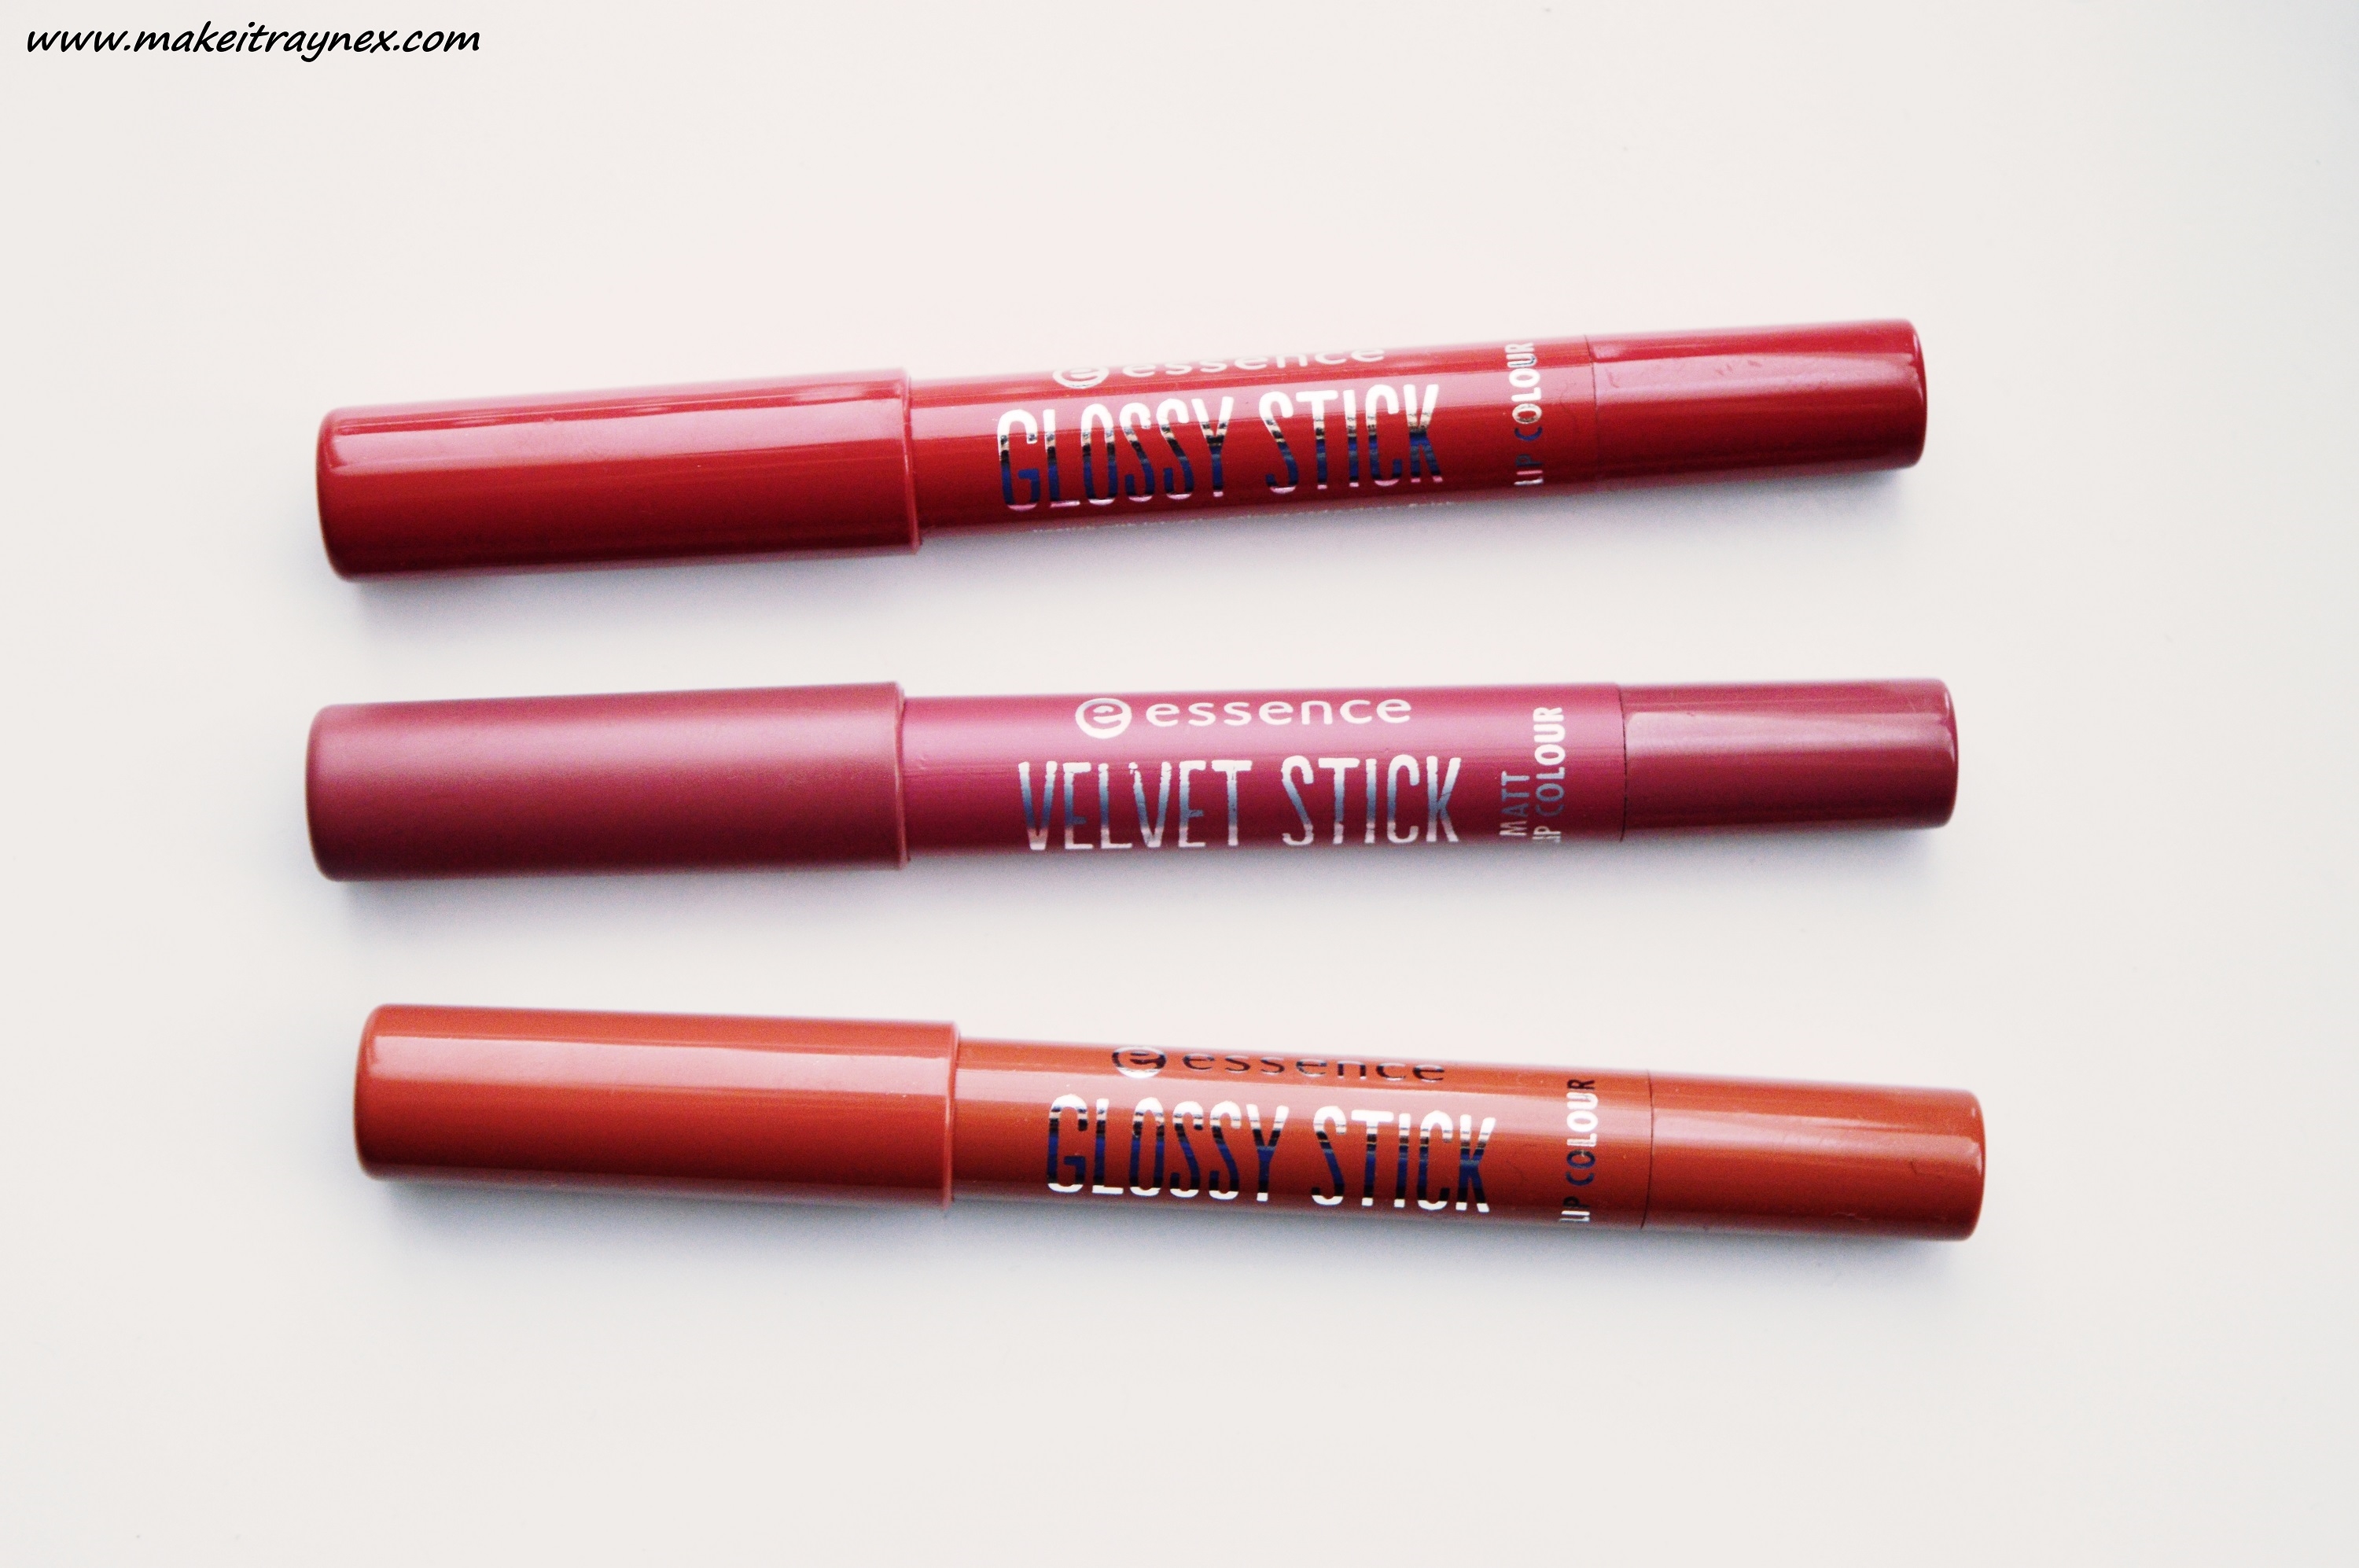 velvet and glossy sticks from essence cosmetics {REVIEW}